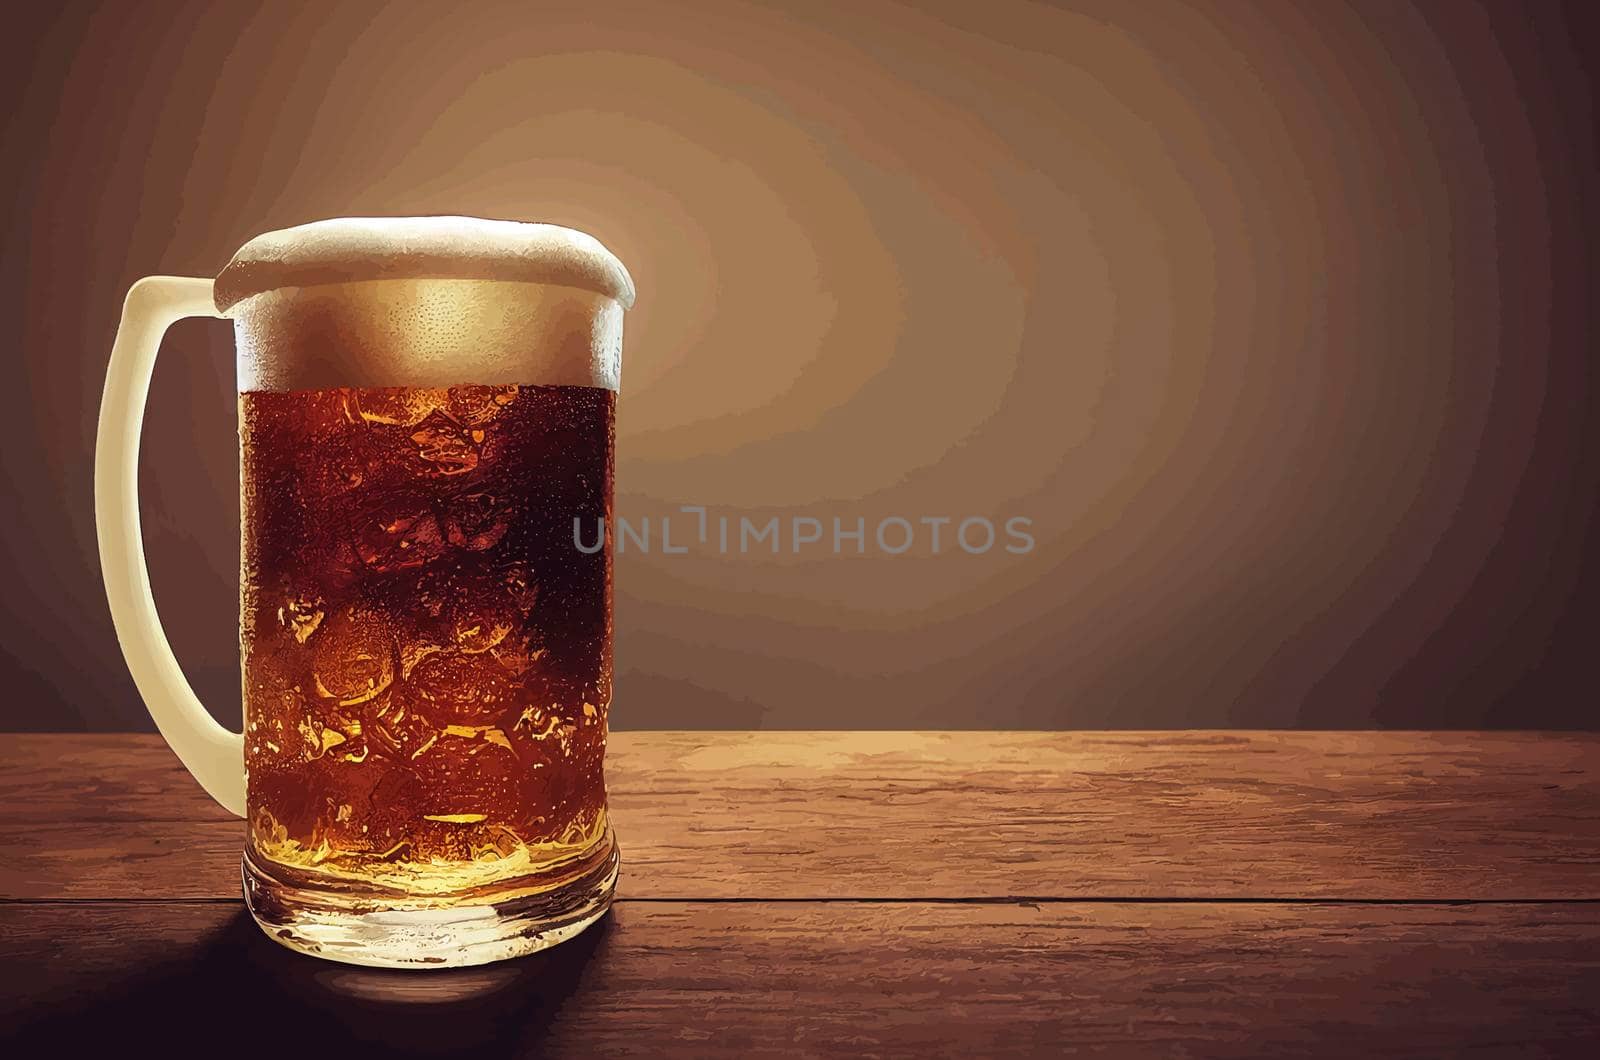 illustration of a mug of cold beer on a wooden table by JpRamos